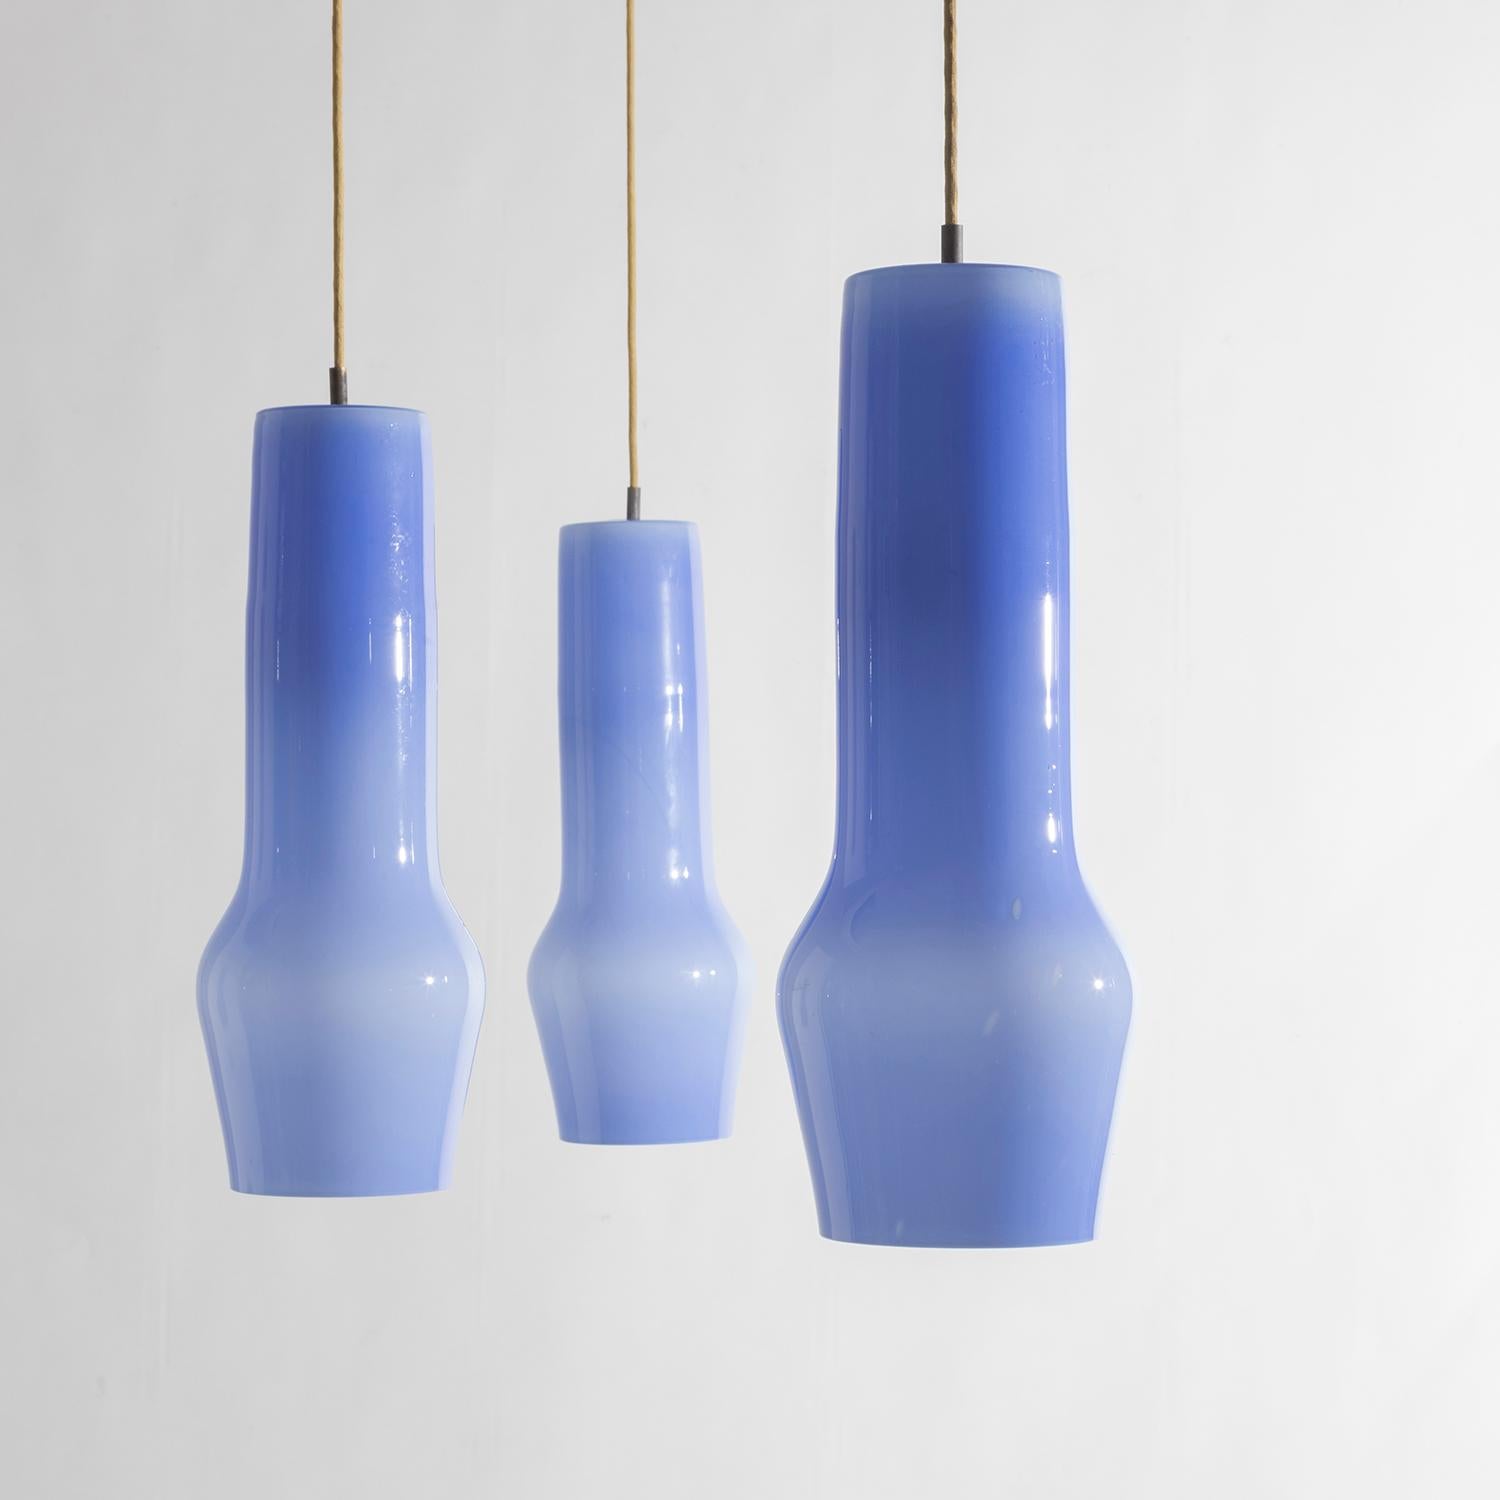 Set of Three pendants mod. 4041 in light blue etched Murano Glass designed by Massimo Vignelli and produced by Venini since 1954. Perfect condition, original electrical system and original brass ceiling cups.